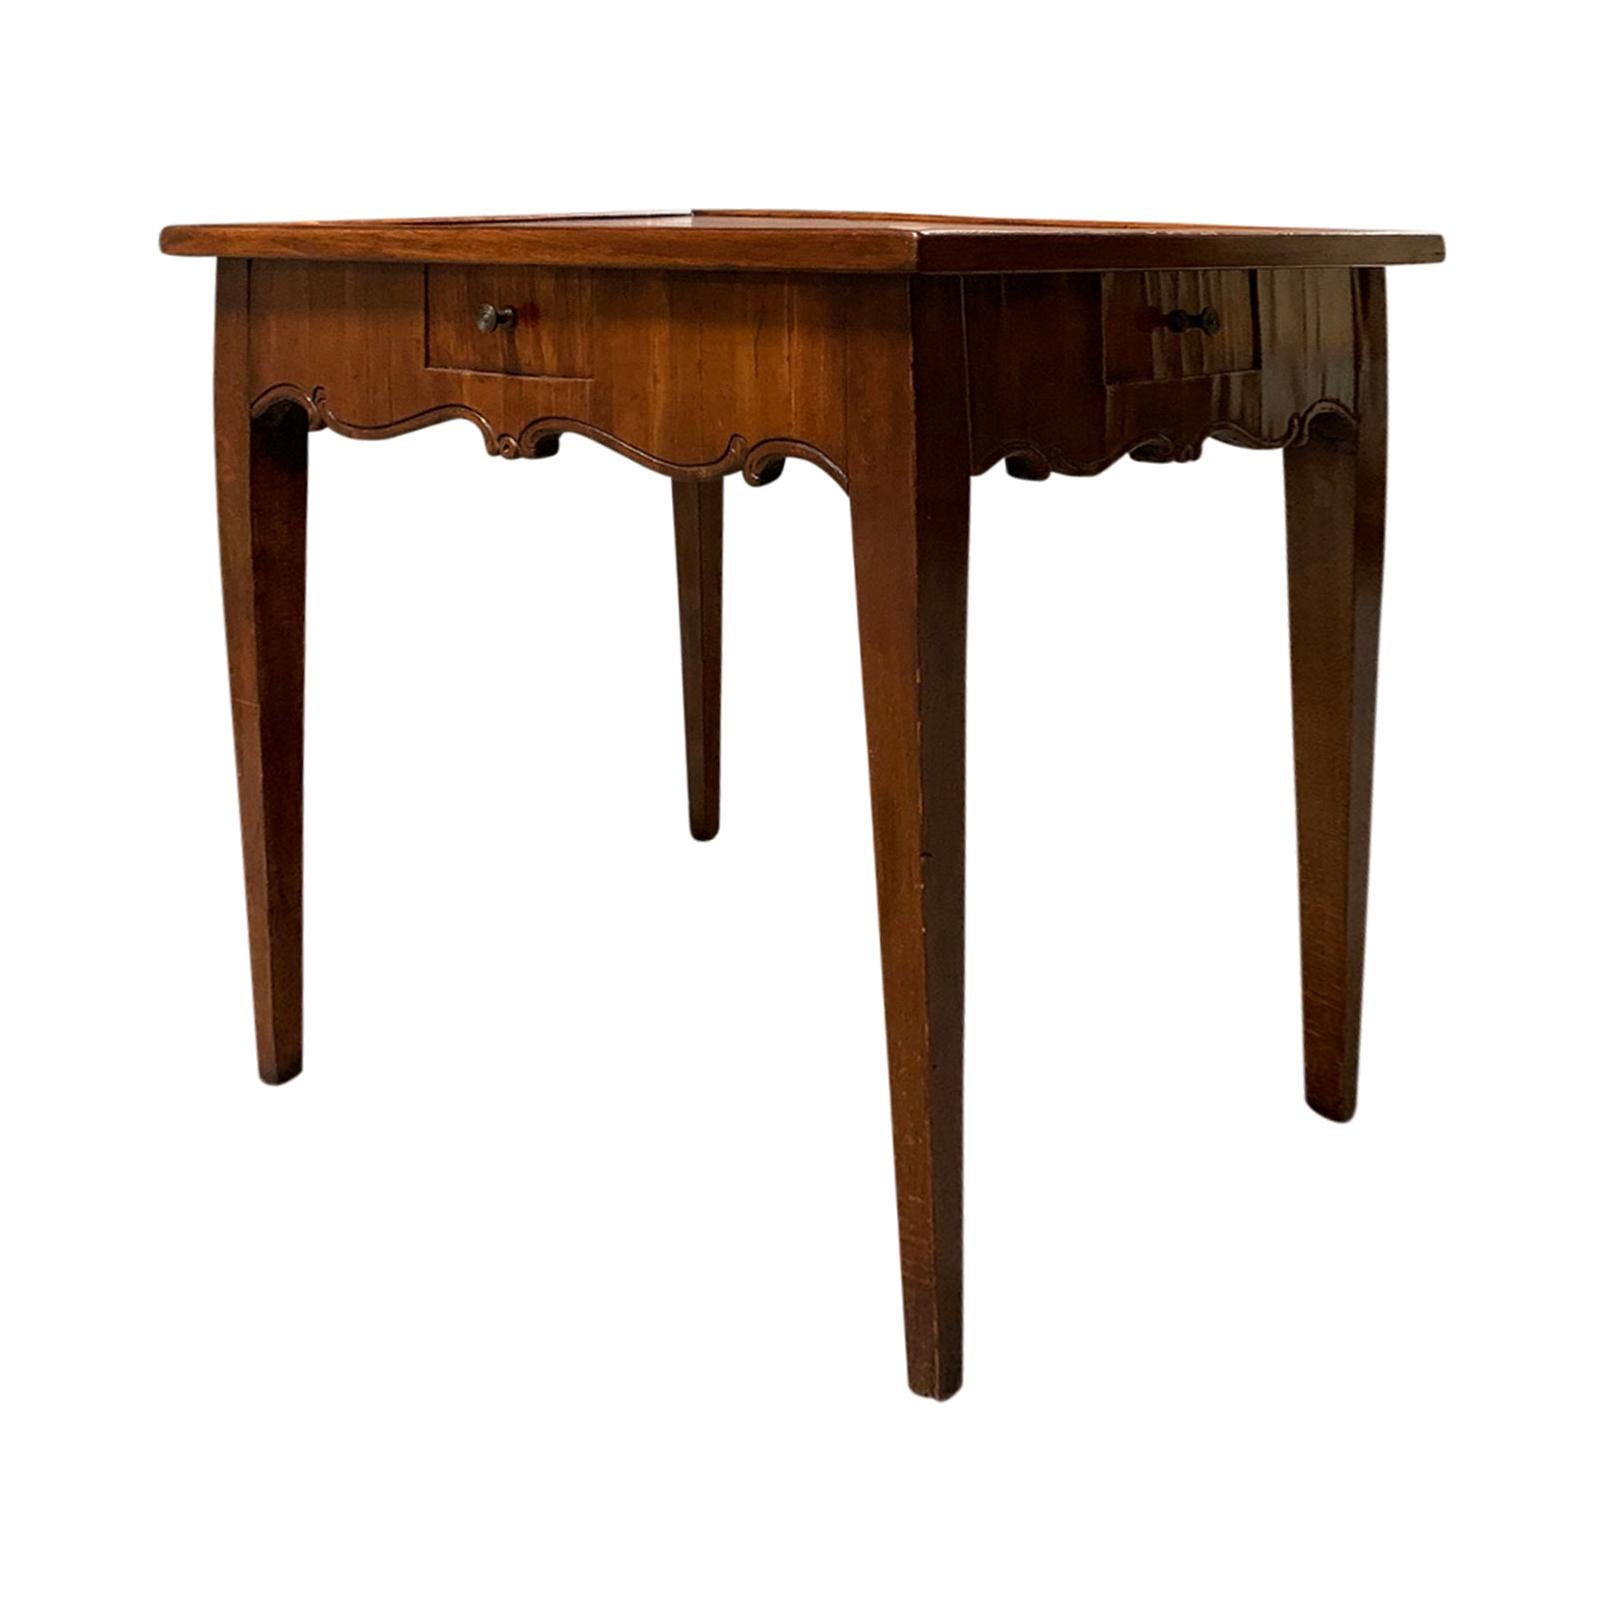 18th-19th Century French Fruitwood Tric-Trac Game Table with Leather Inset